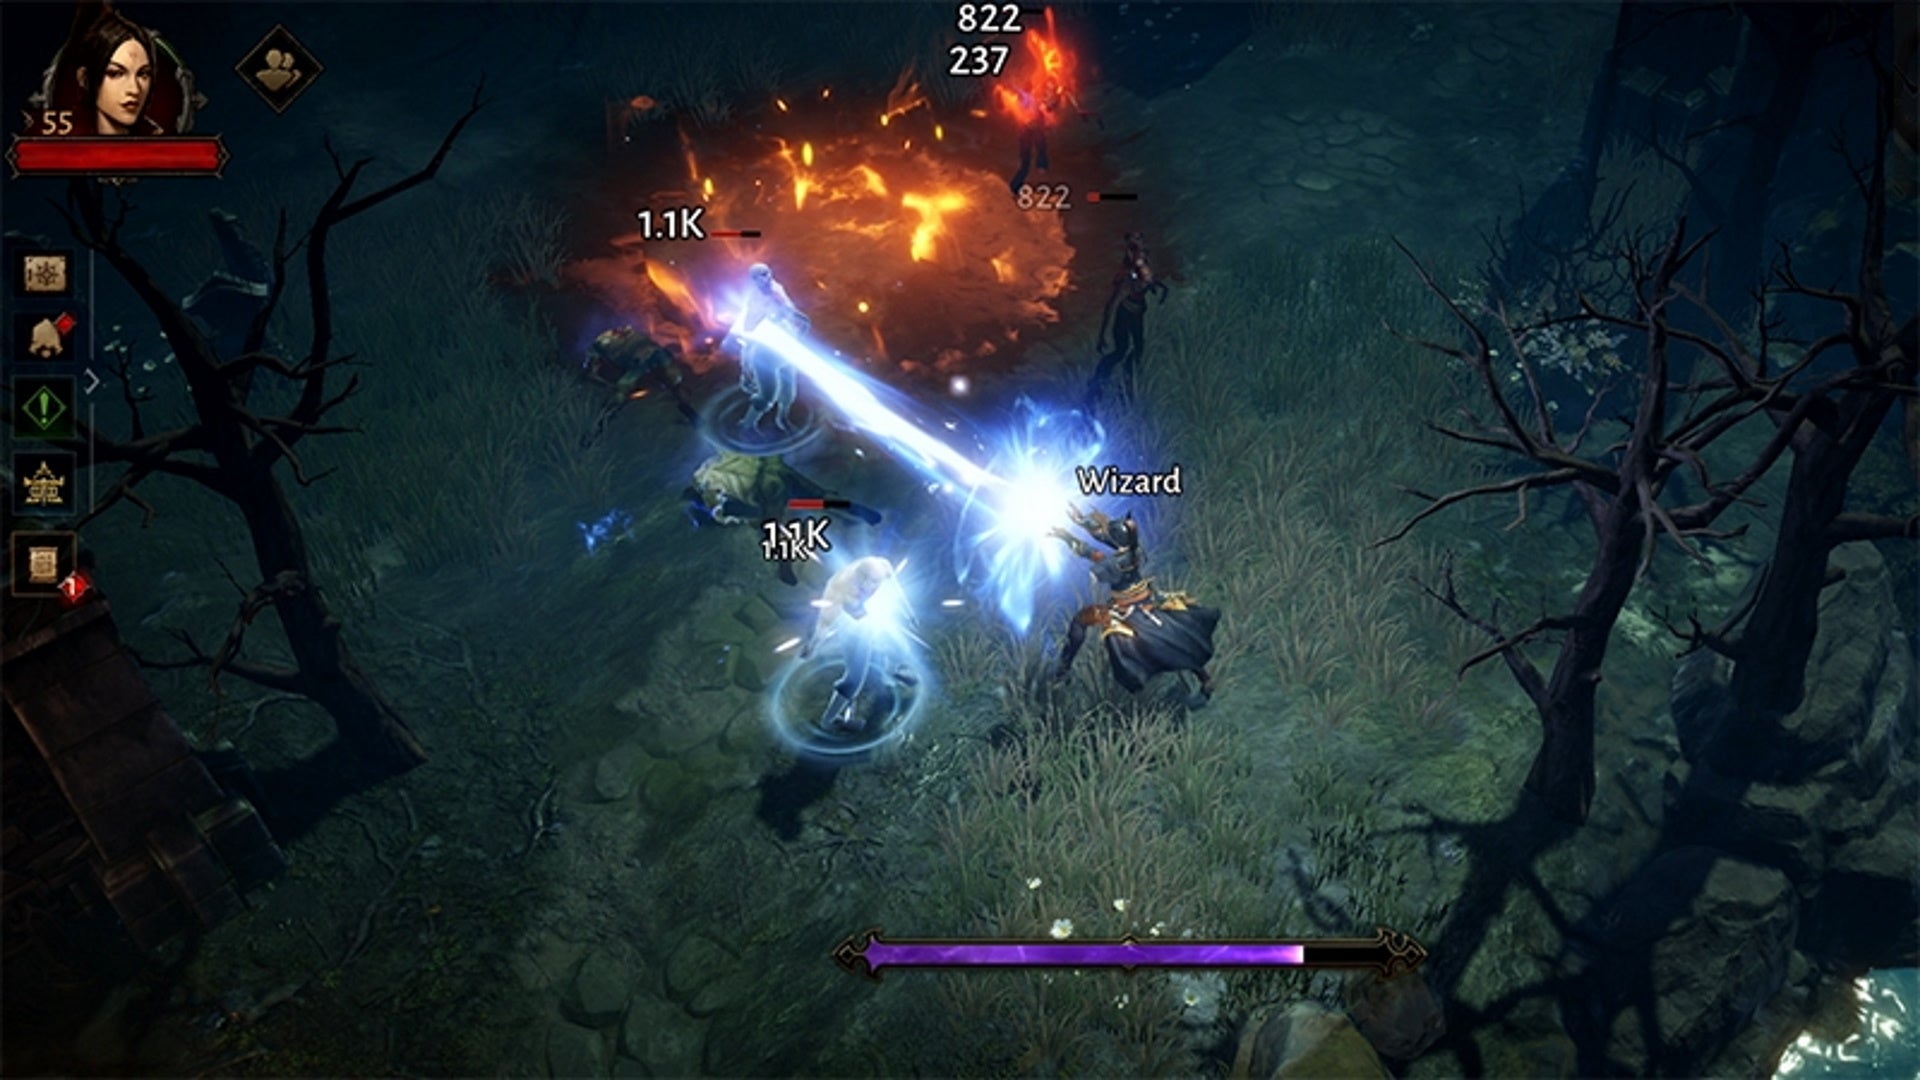 A party in Diablo Immortal faces enemies on Hell difficulty